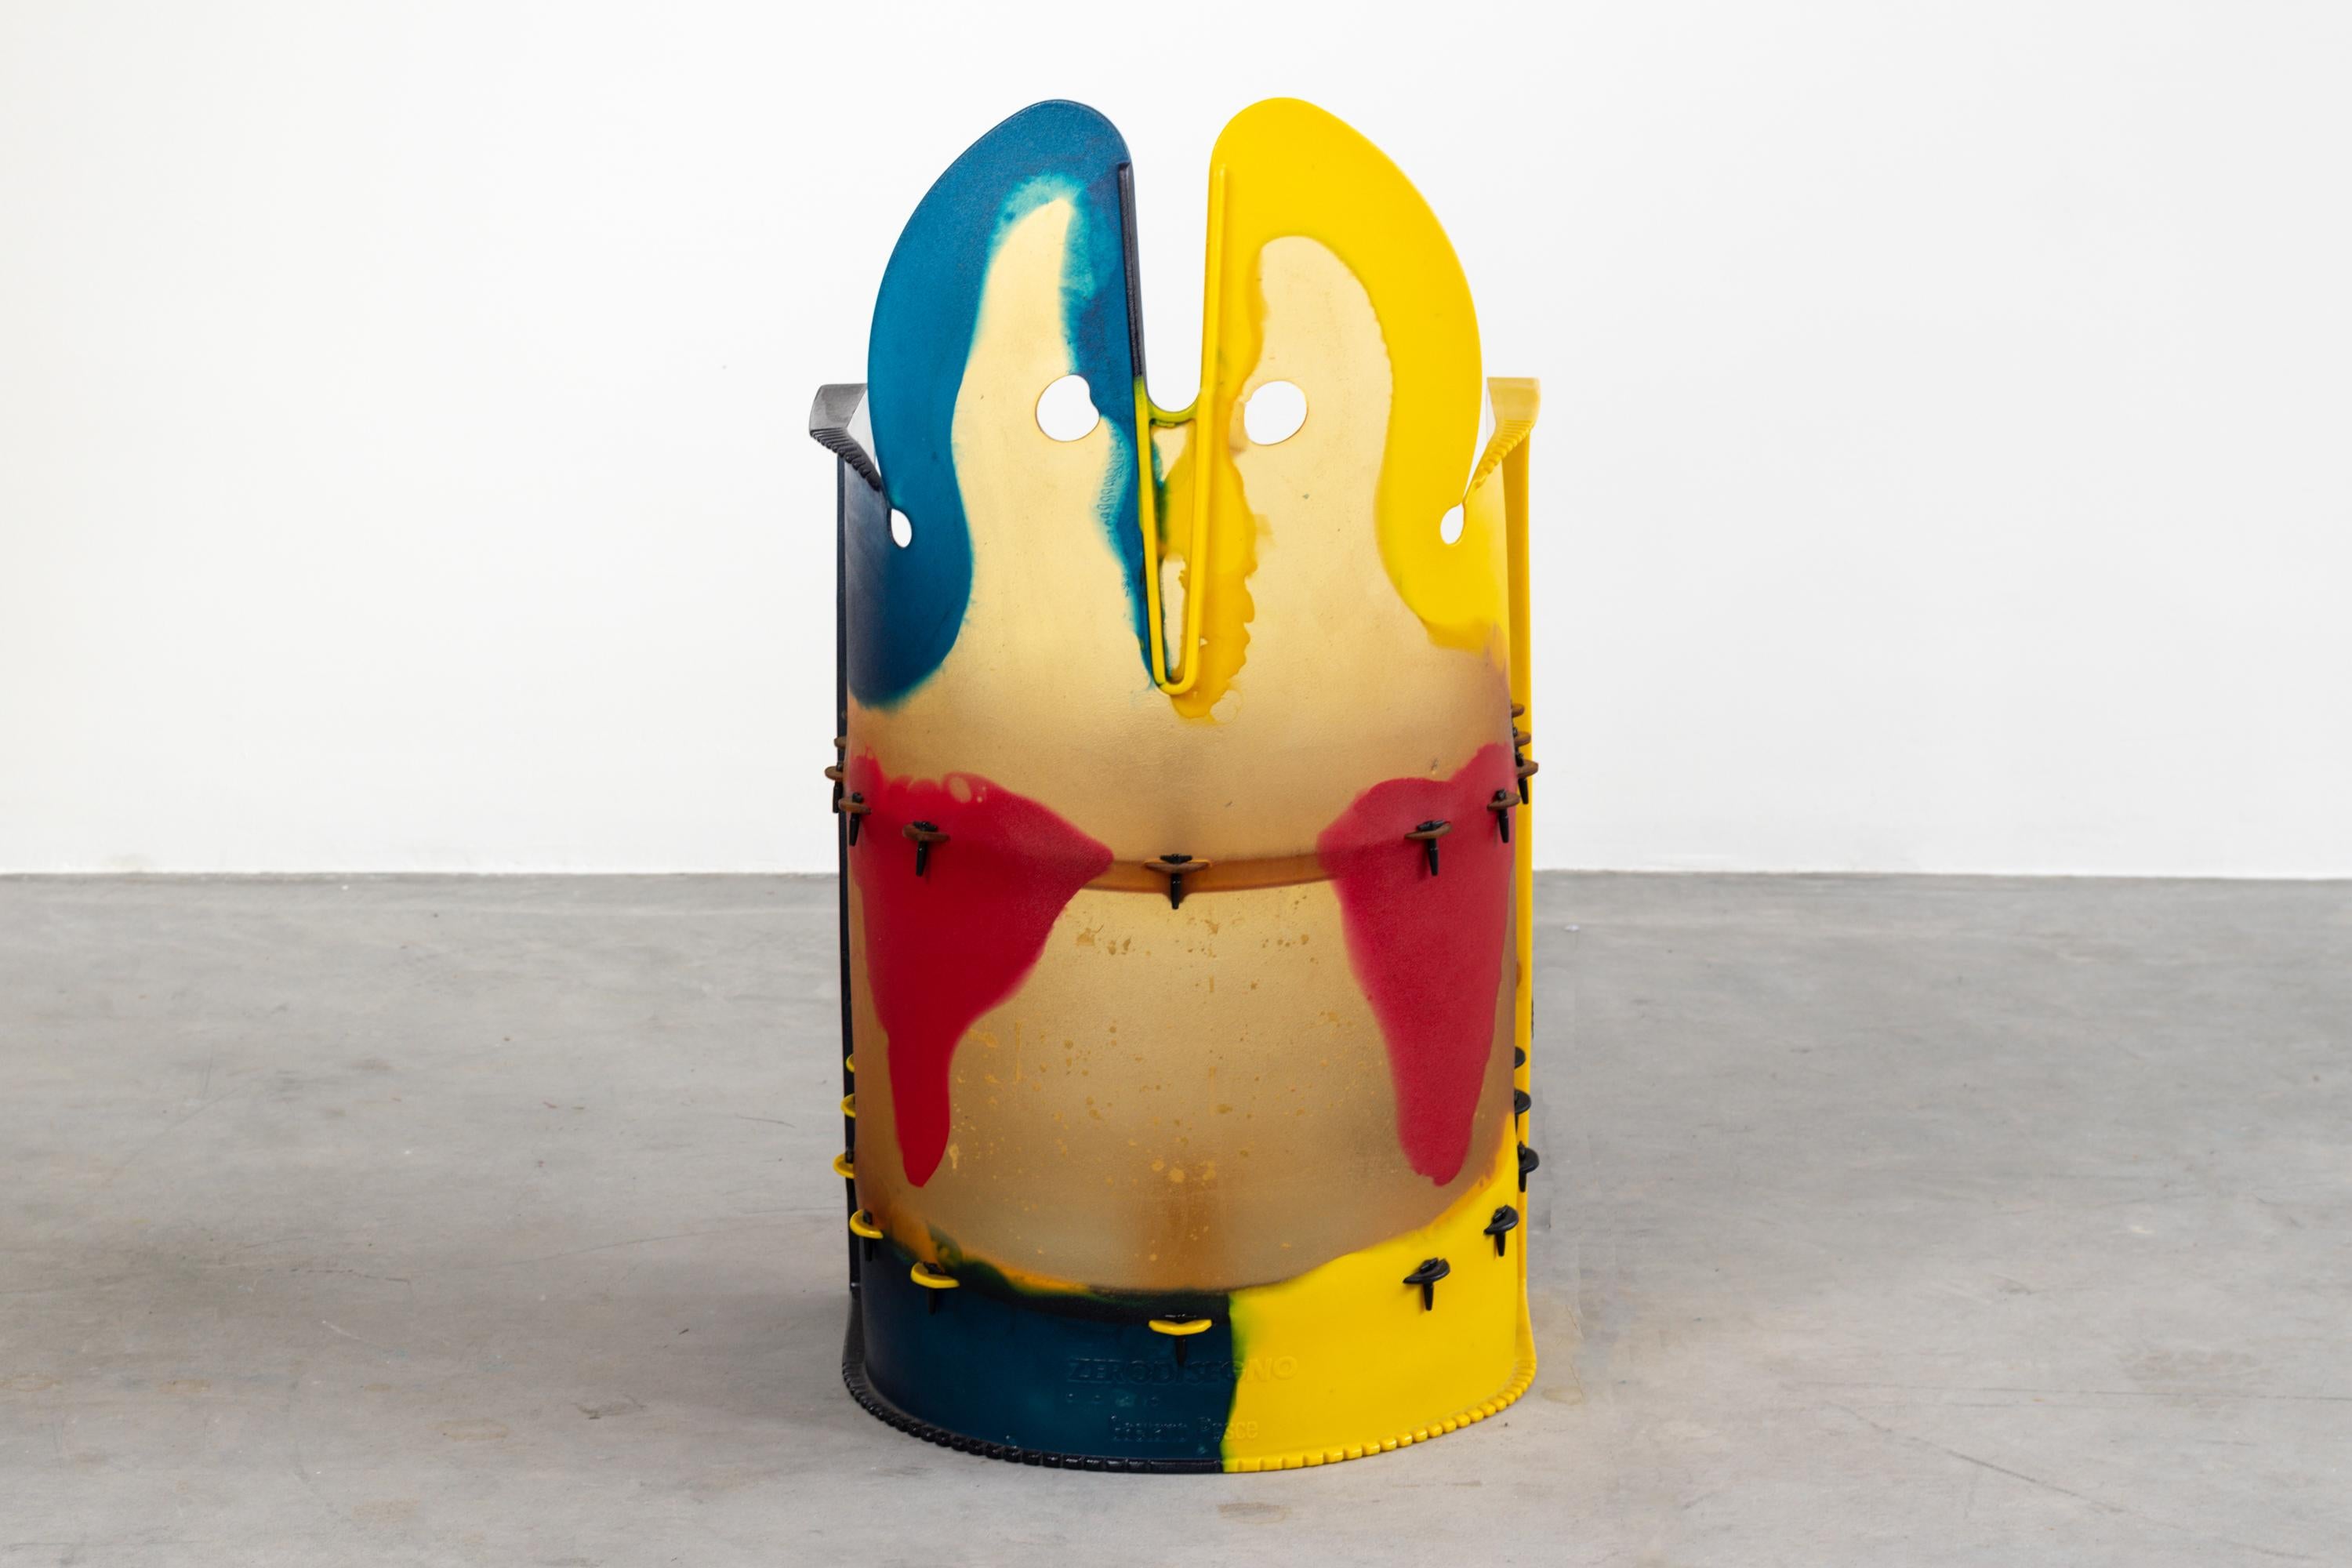 Other Gaetano Pesce Multicolored Armchair from Nobody's Perfect Series Zerodisegno